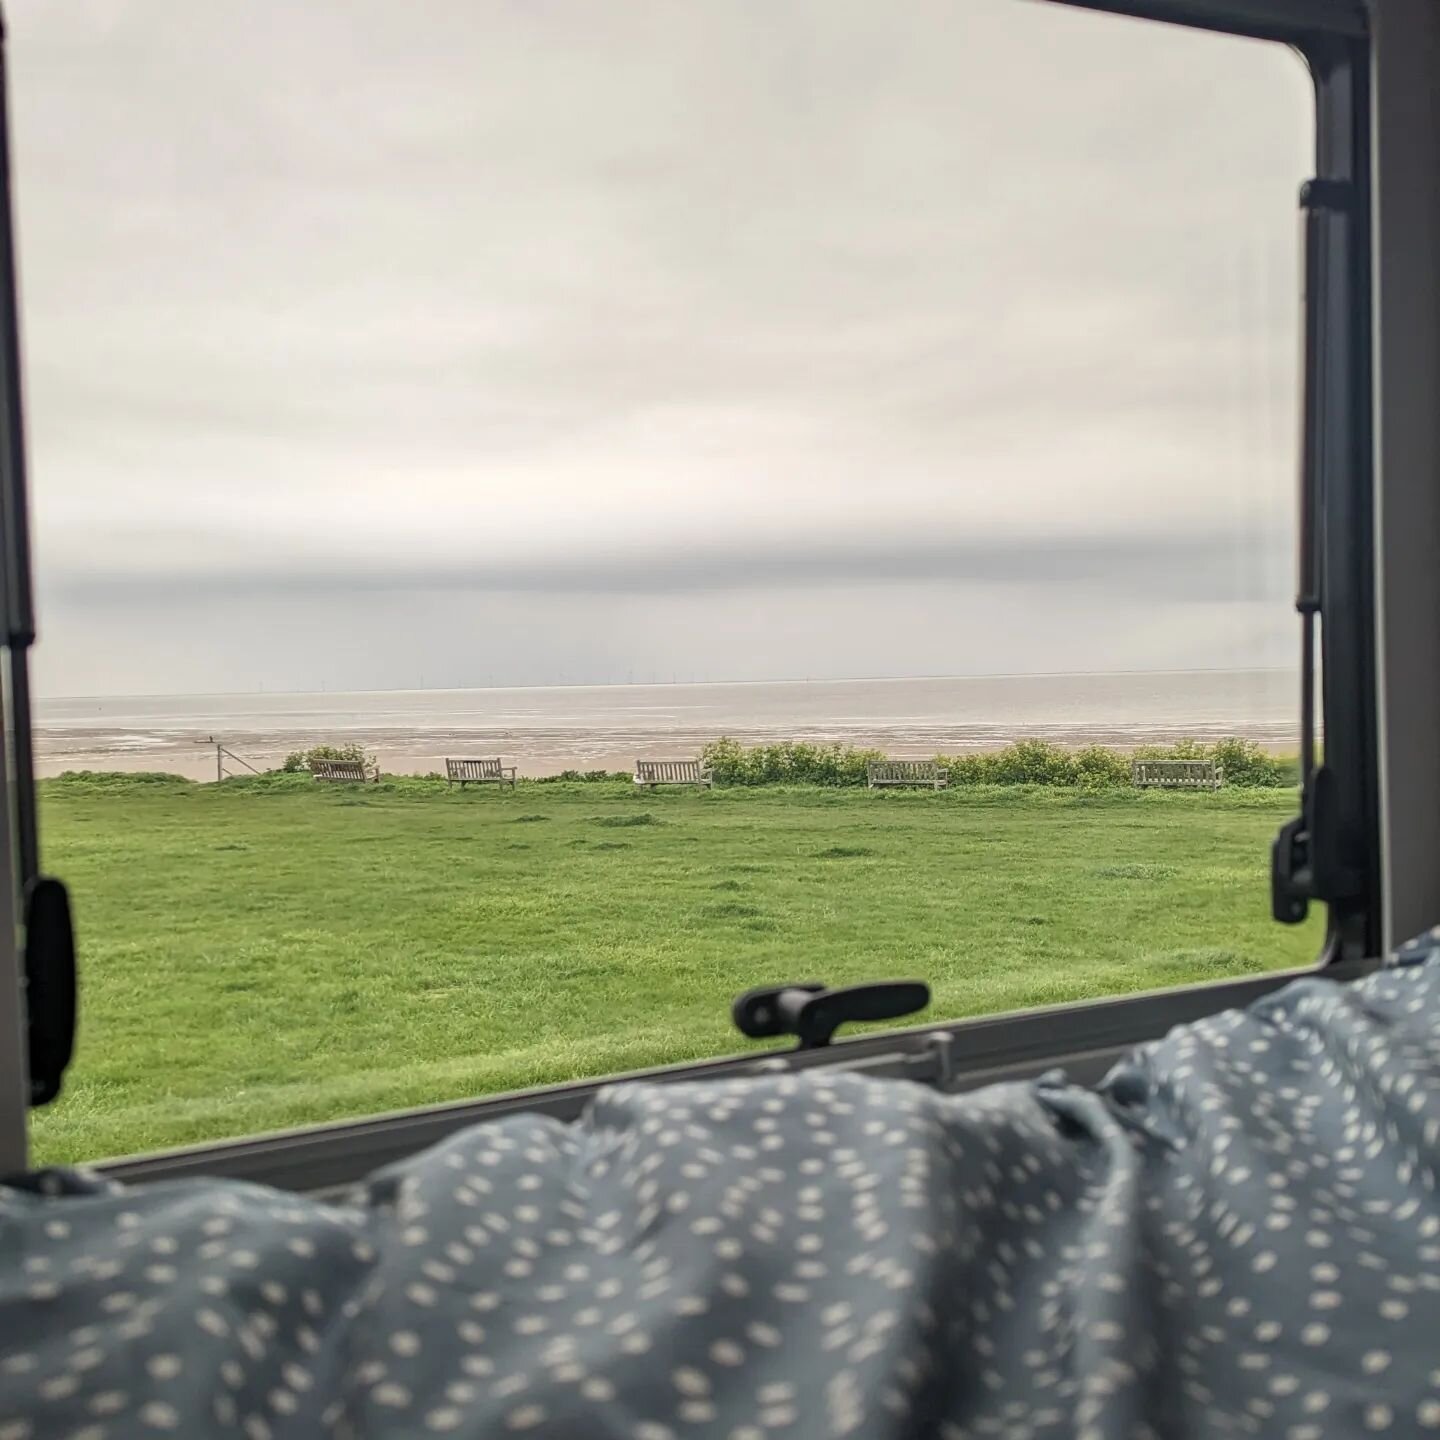 Quality family time #qft with 3/4 of the fam @canterburycampers ftw 🙌. 

Amazing how an overnighter less than 30 mins from home can feel like you've stopped the world and press reset. 

If you want to rent Skylark for your own reset, check out the l